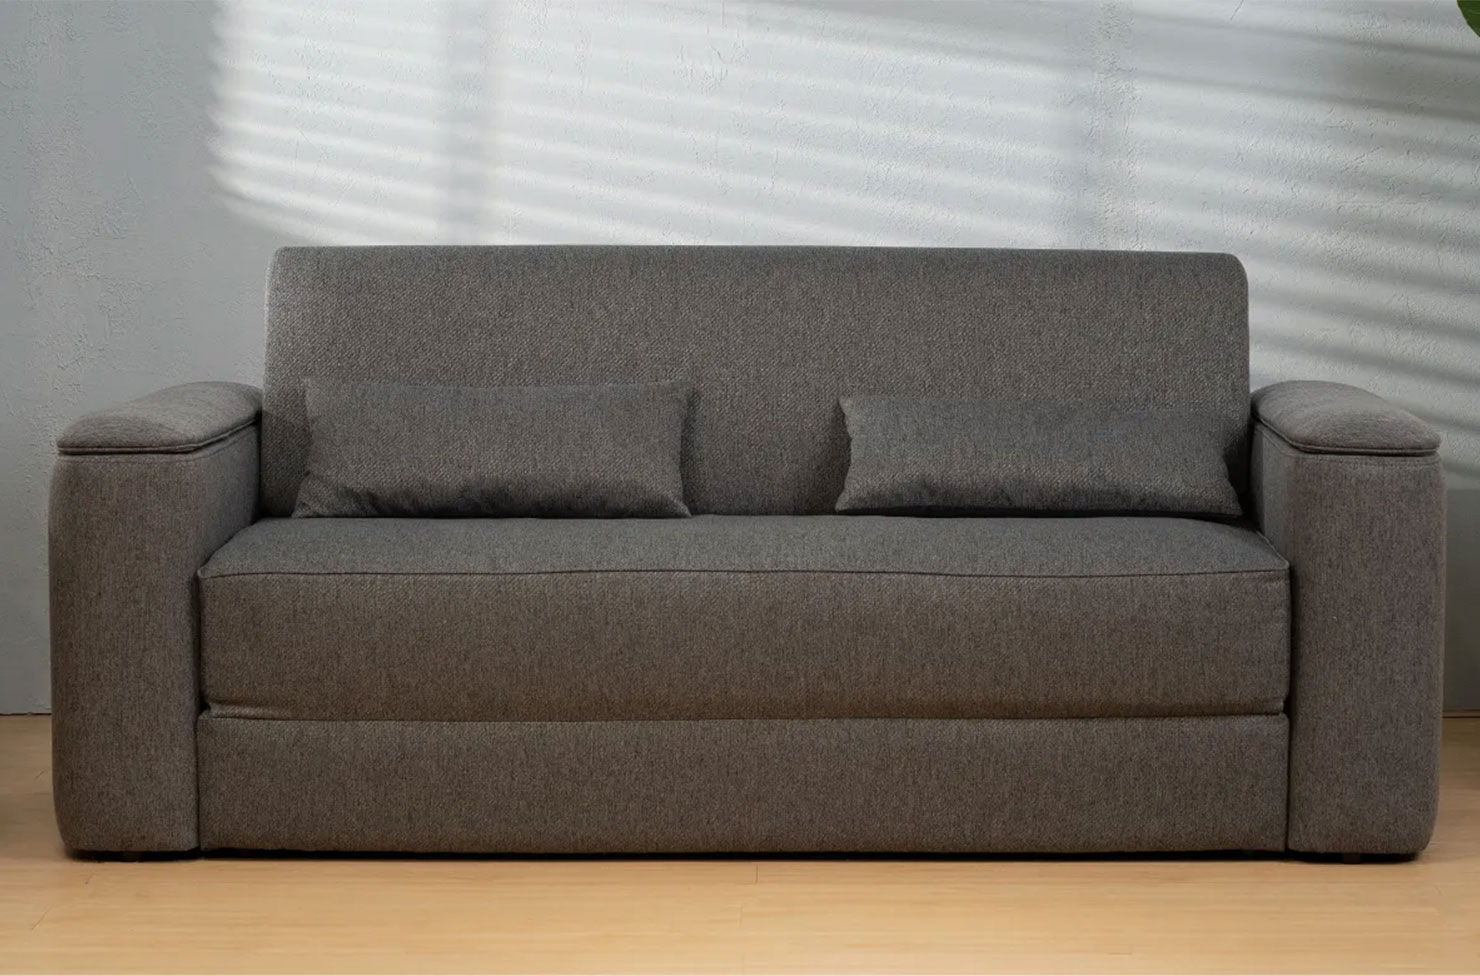 The Best Sofa Beds To Now For